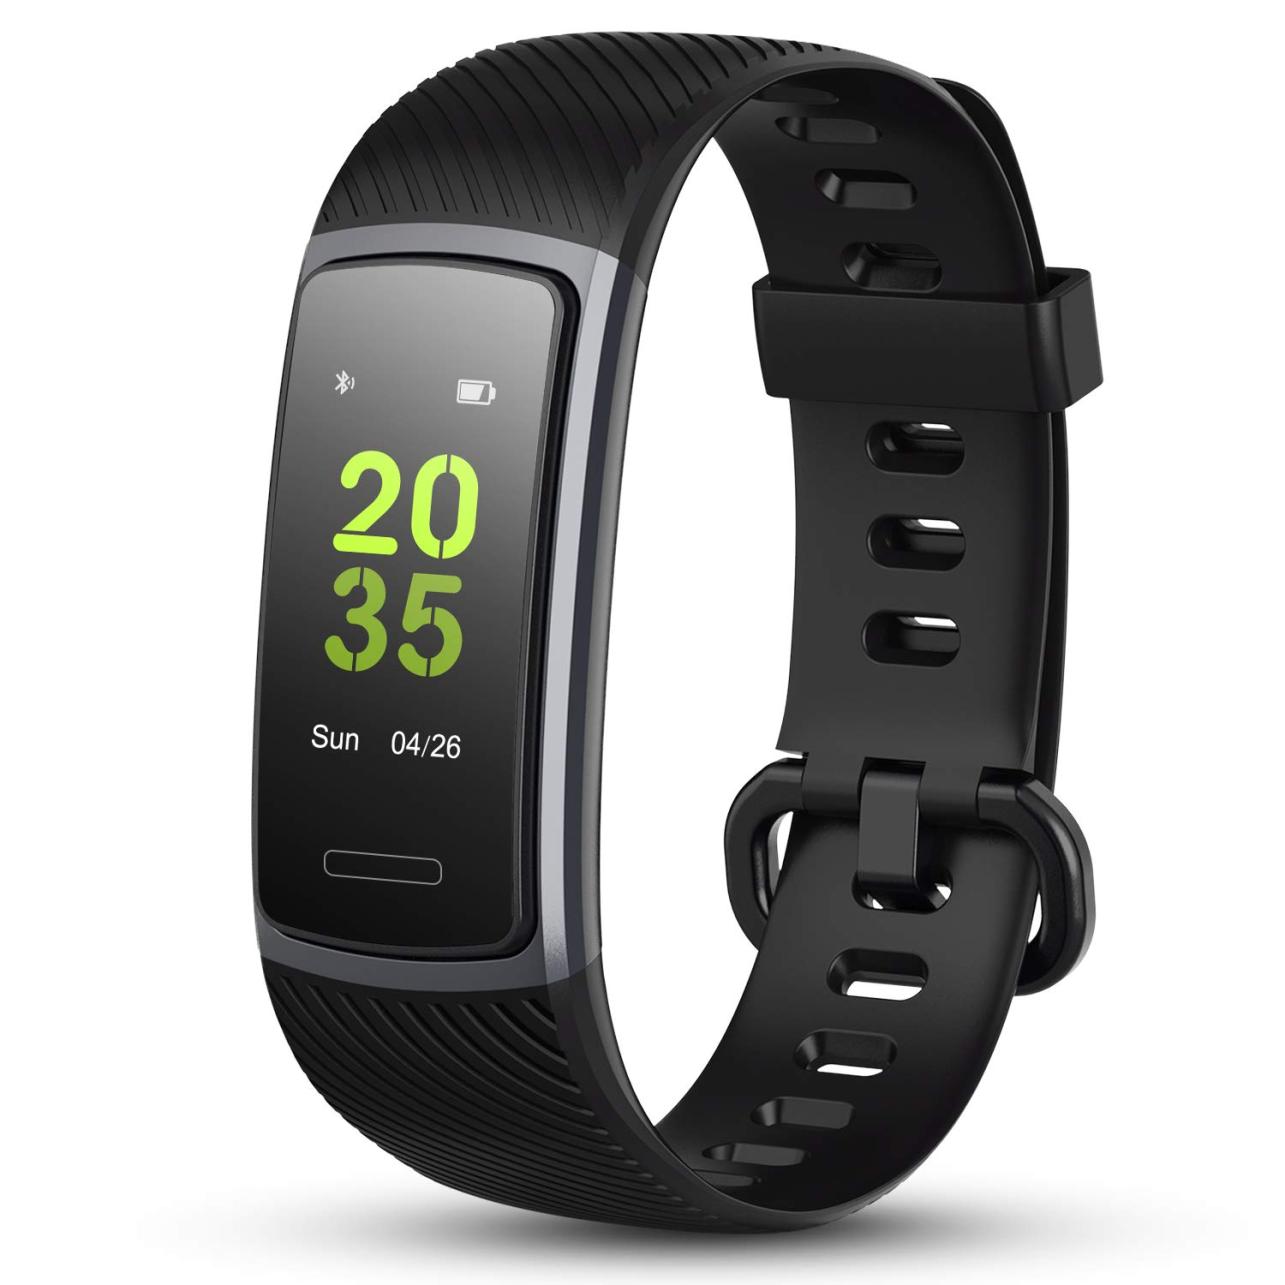 How Do I Choose The Right Fitness App And Heart Rate Monitor For Me?